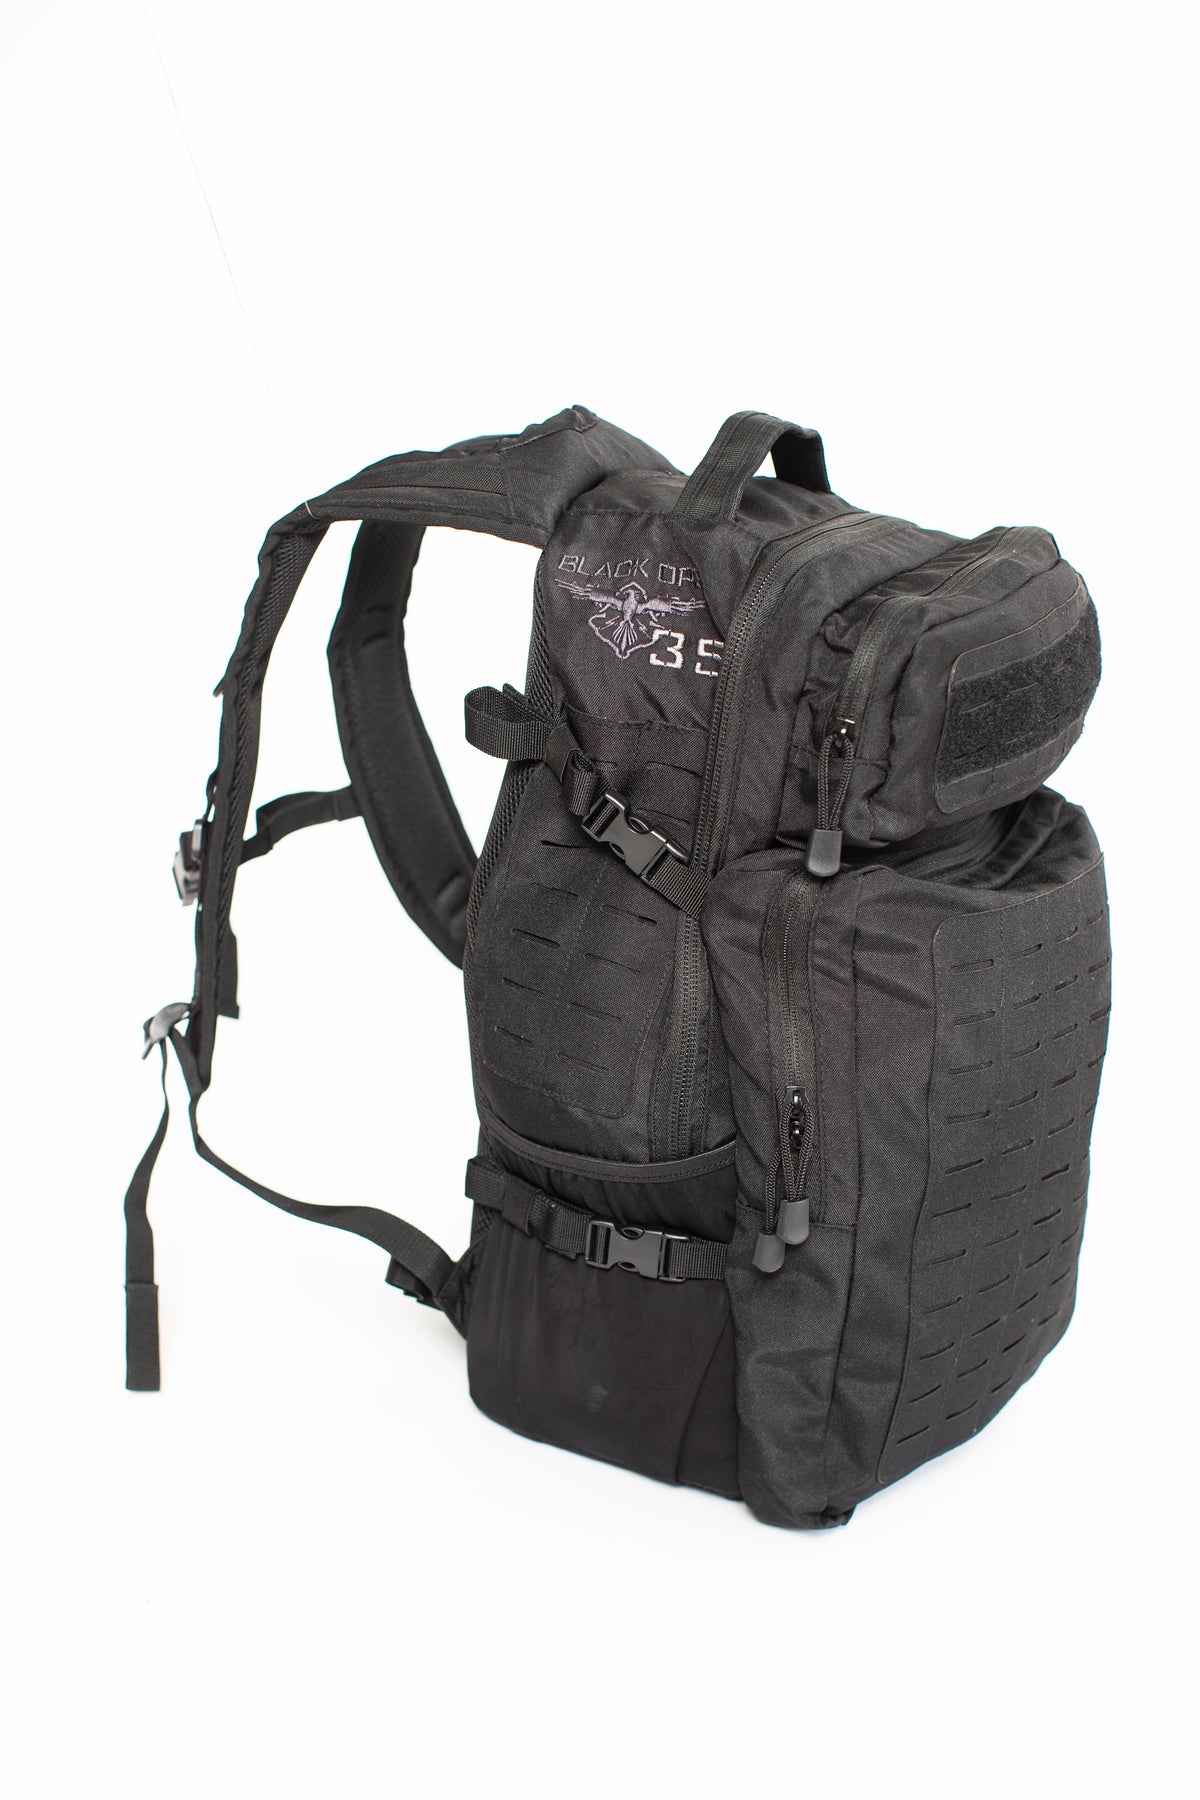 Mil-Tec Molle Backpack 36L Review 